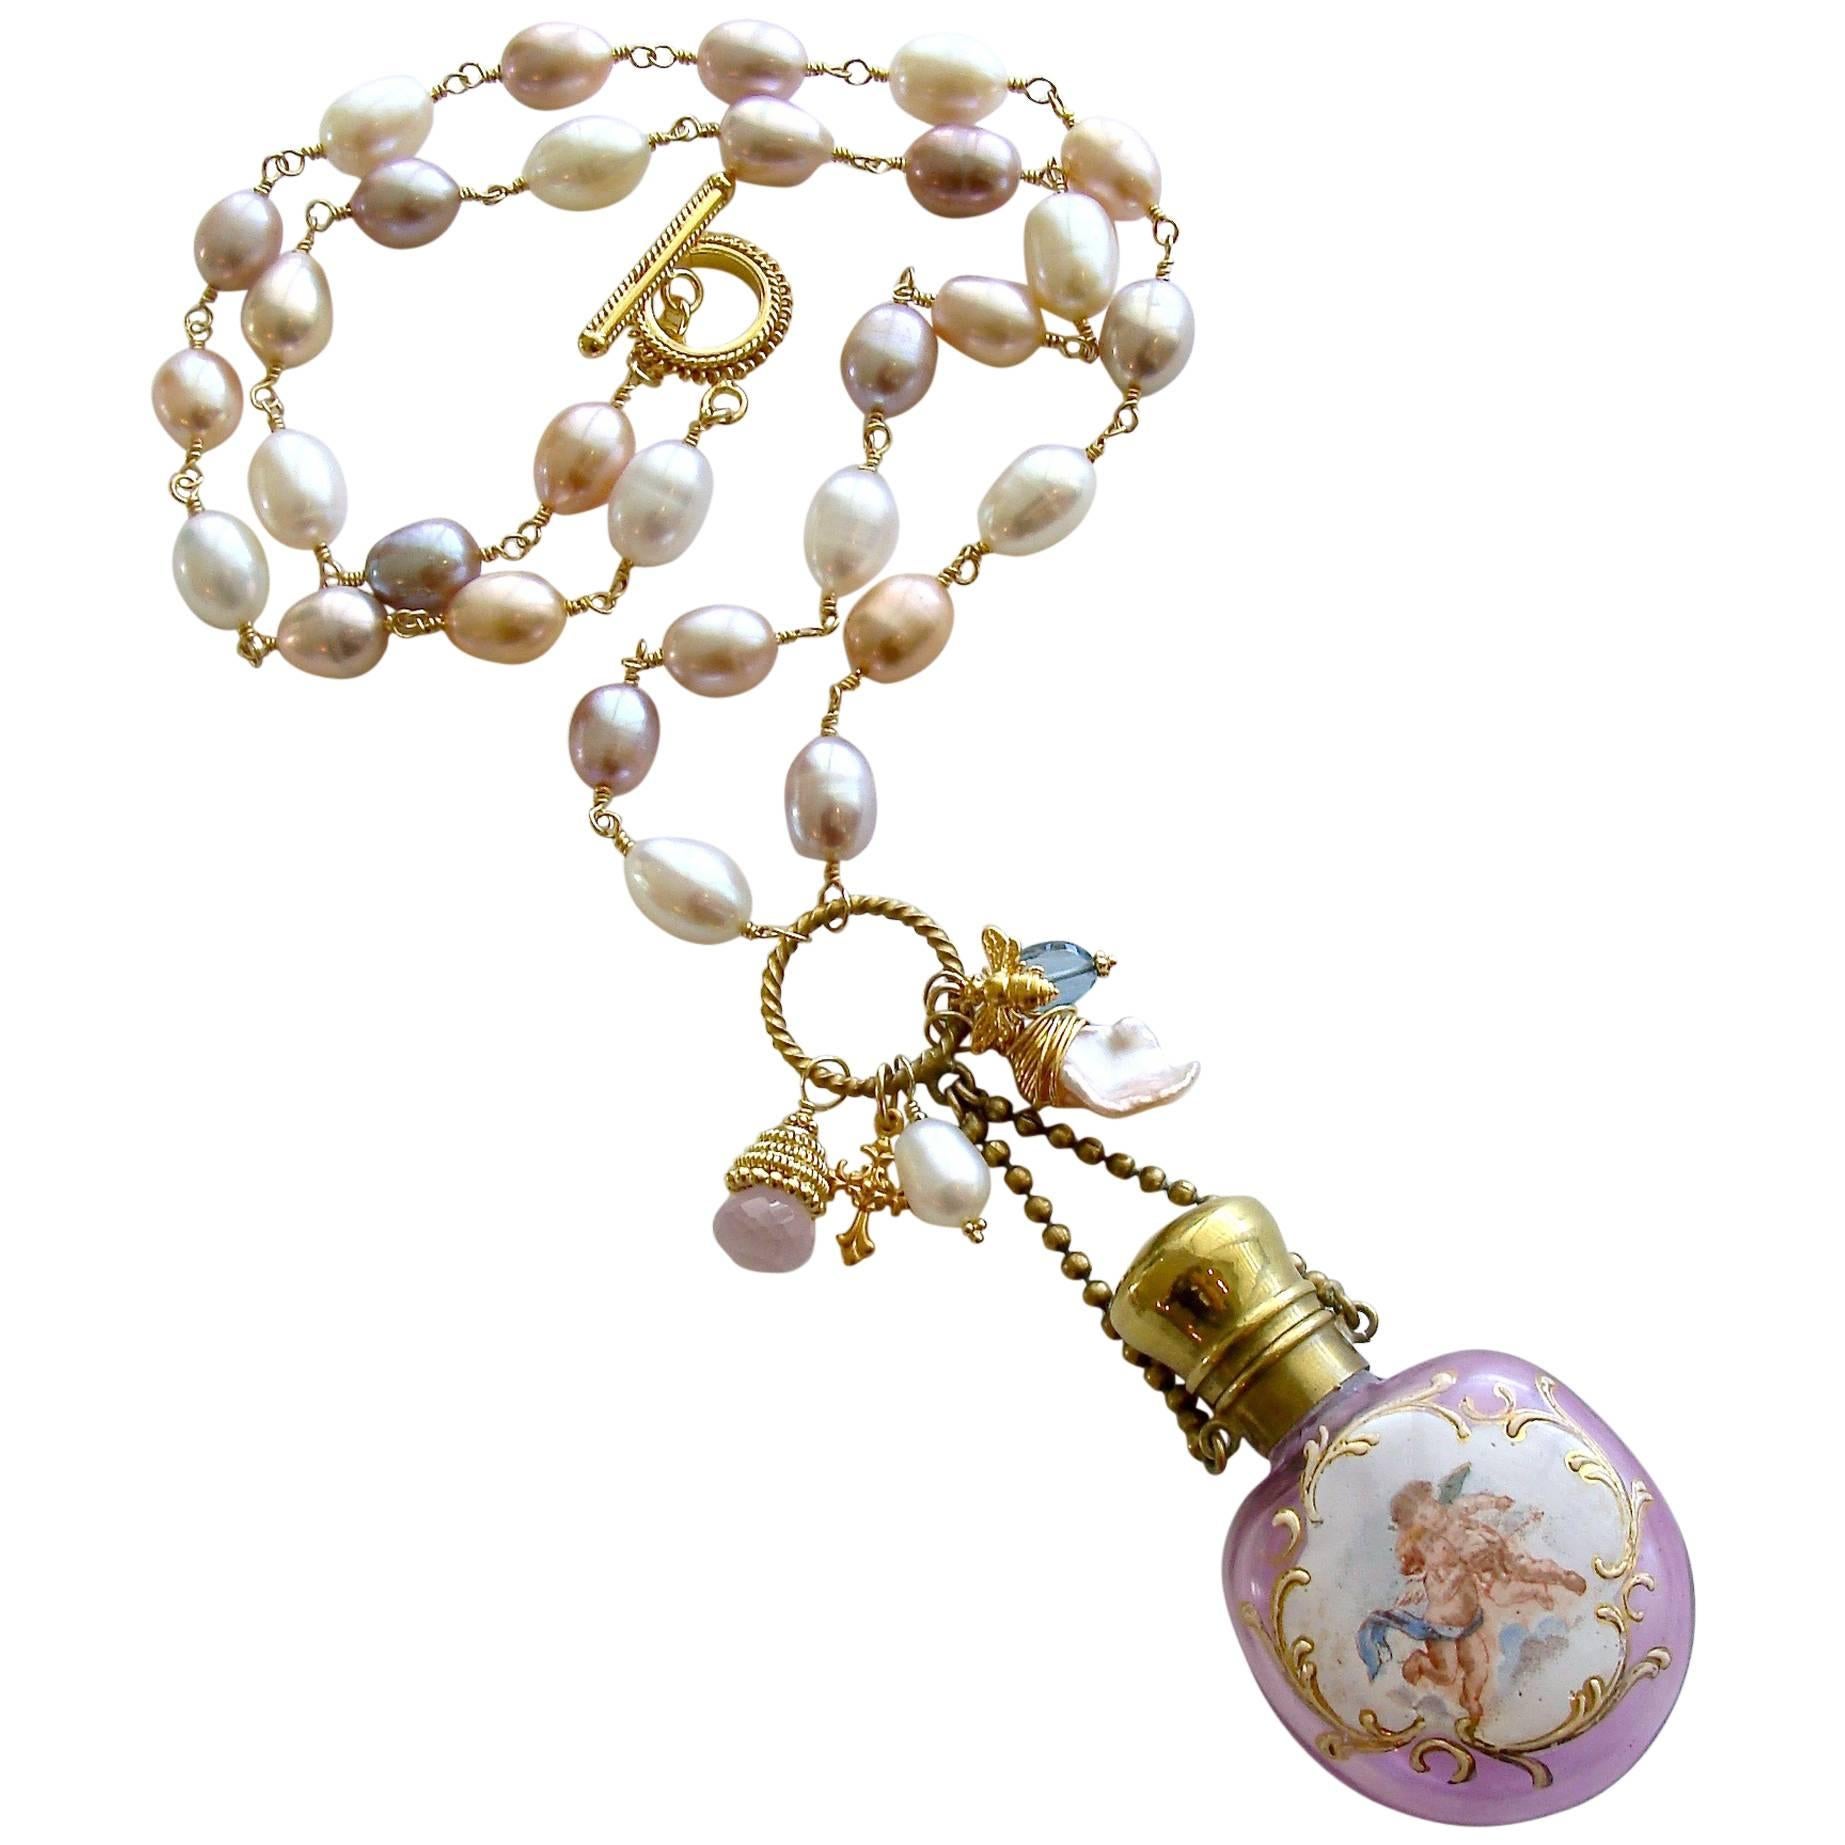 Pink Pearls Cherub Chatelaine Scent Bottle Necklace